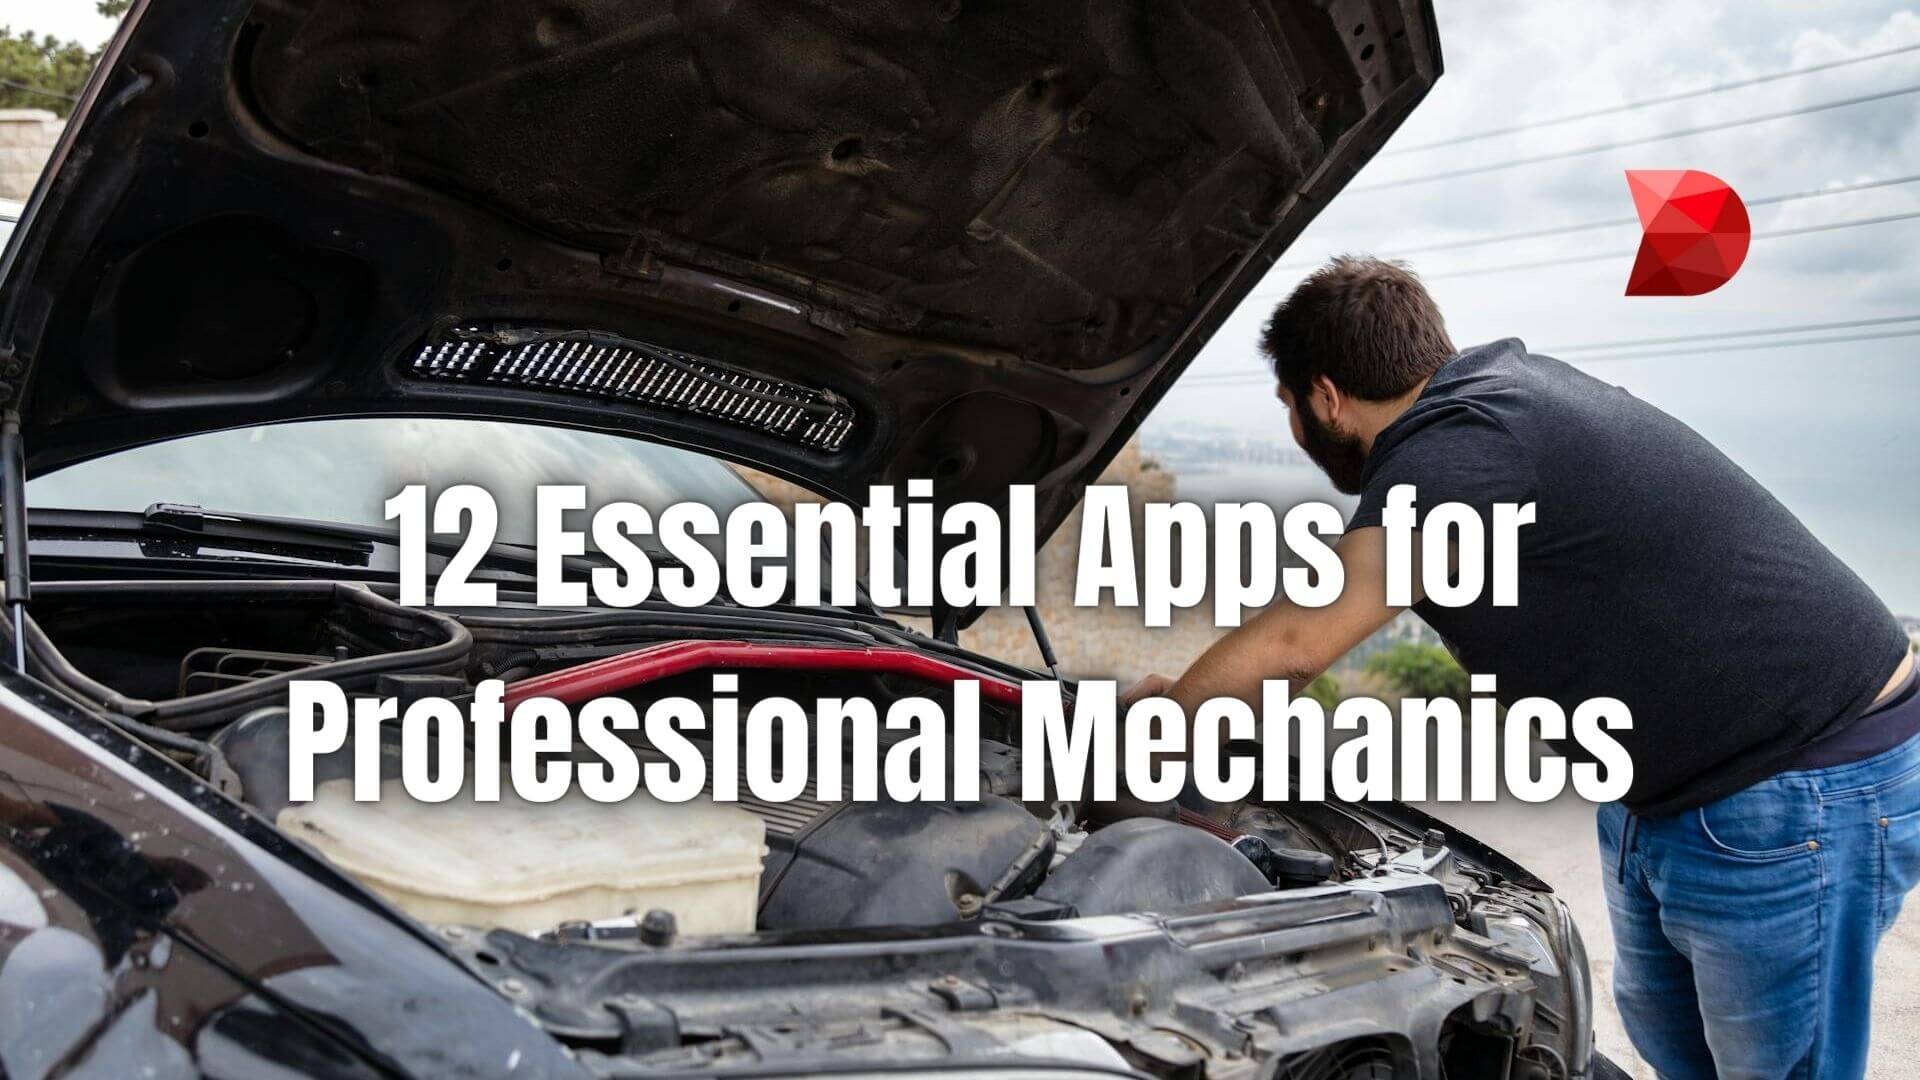 Equip yourself with the ultimate arsenal of apps! Click here to explore our guide to the 12 essential apps for professional mechanics.